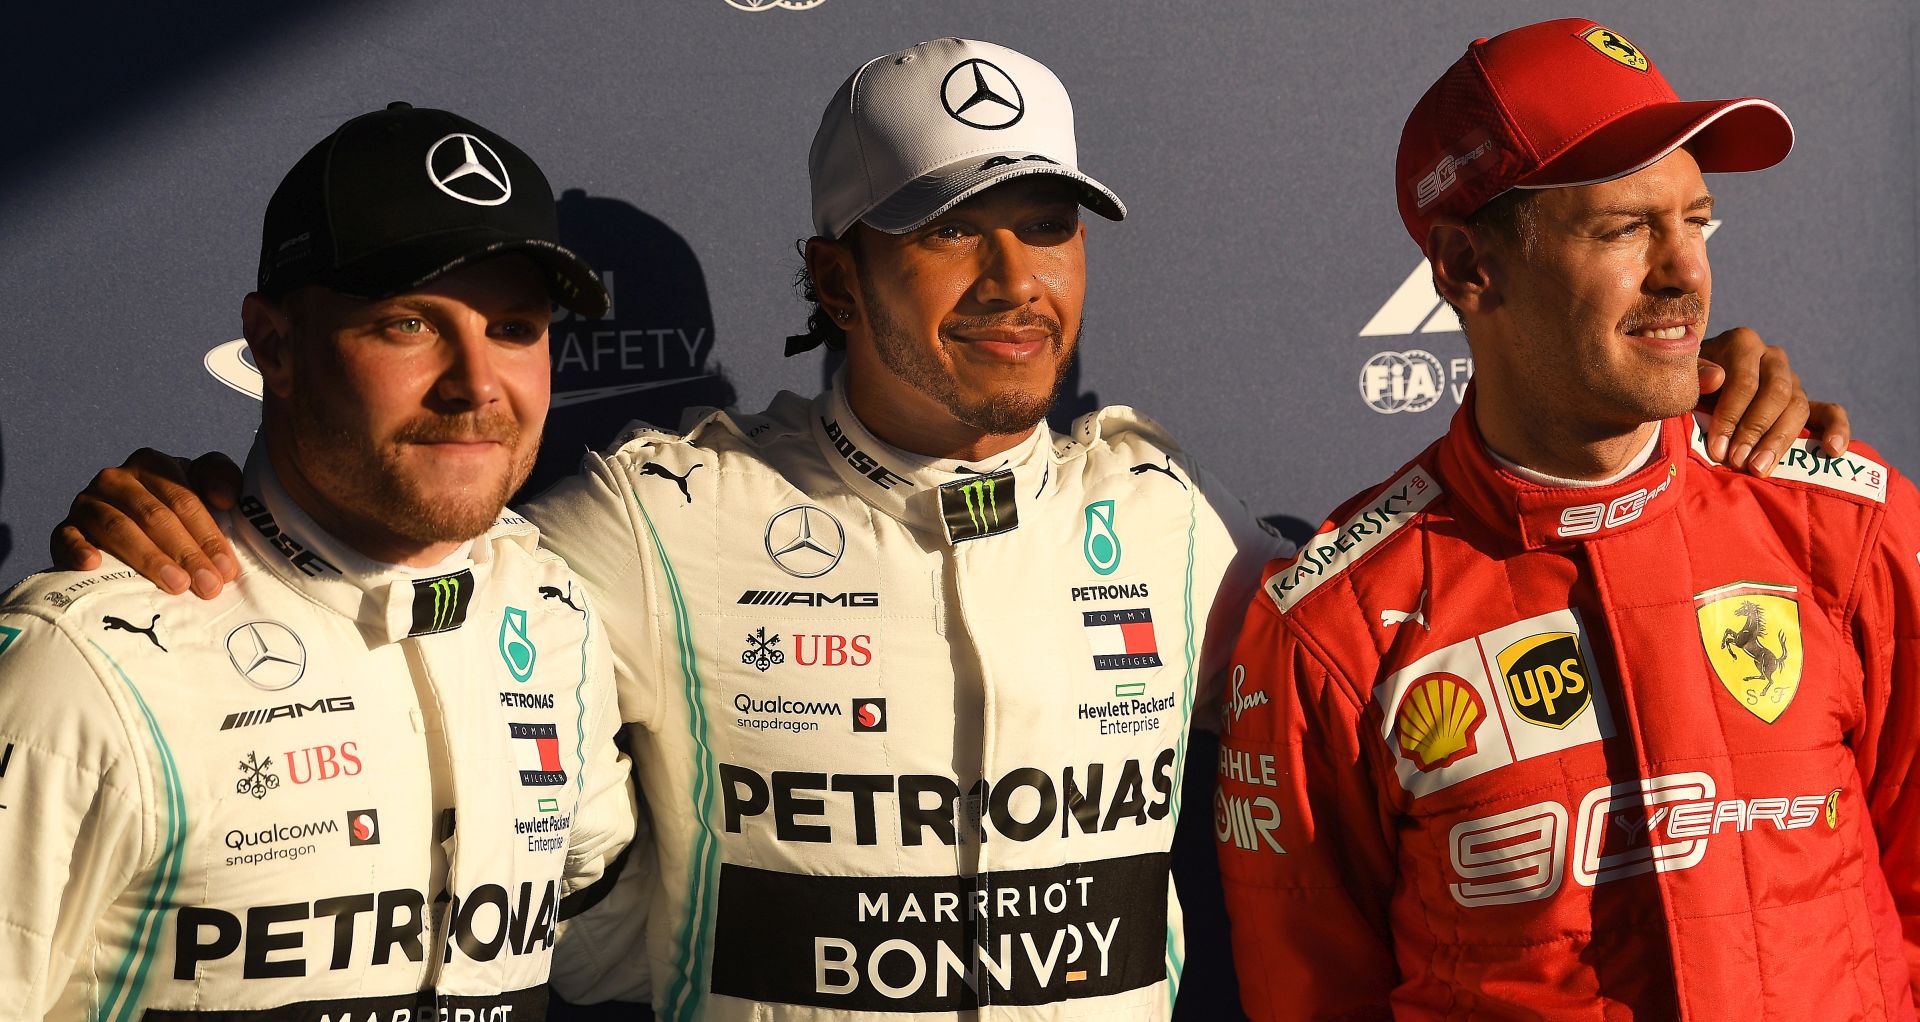 epa07441481 (L-R) Valtteri Bottas of Finland, Lewis Hamilton of Great Britain and Sebastian Vettel of Germany are seen after qualifying first, second and third respectivley after the qualifying session for the 2019 Formula One Grand Prix of Australia at the Albert Park Grand Prix Circuit in Melbourne, Australia, 16 March 2019. The 2019 Formula One Grand Prix of Australia will take place on 17 March 2019.  EPA/JULIAN SMITH AUSTRALIA AND NEW ZEALAND OUT